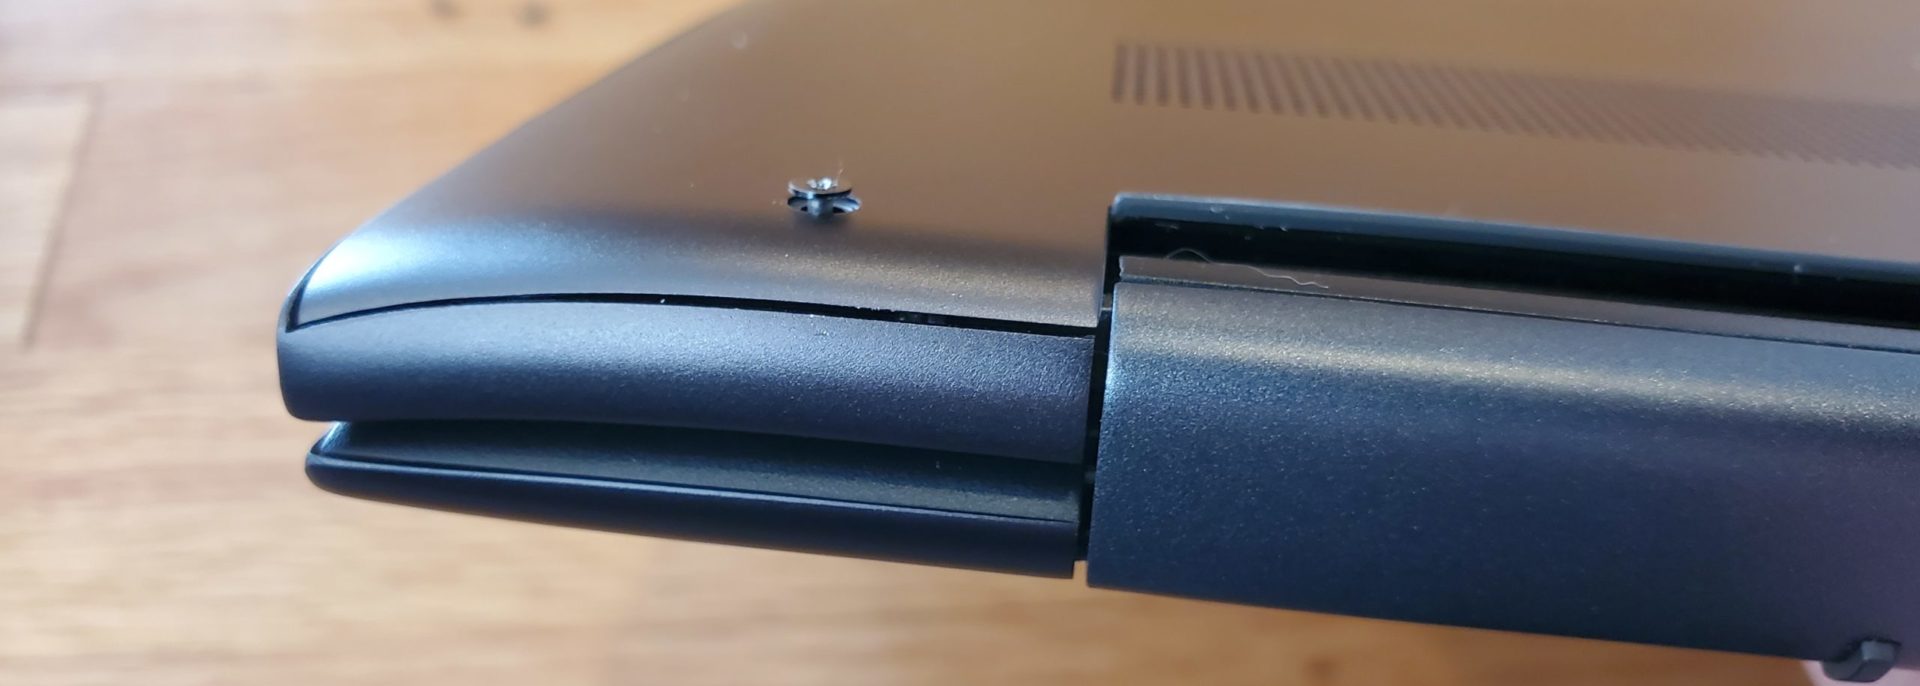 close up of a captive screw on the bottom cover of a dell inspiron 15 7000 2-in-1